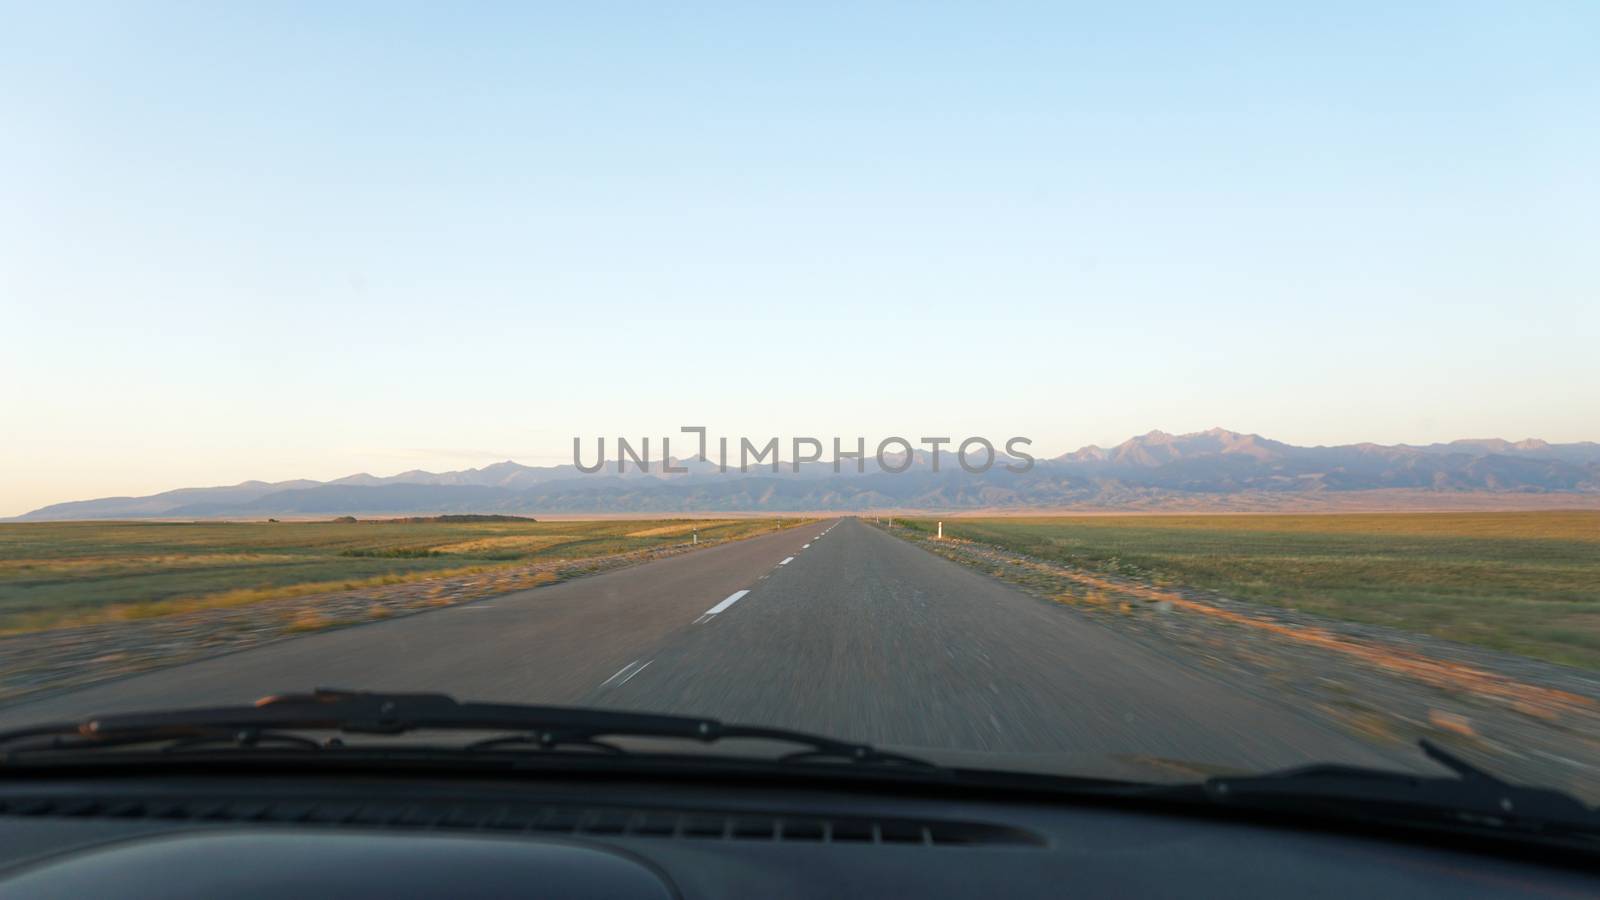 View through the windshield of the car on the road by Passcal